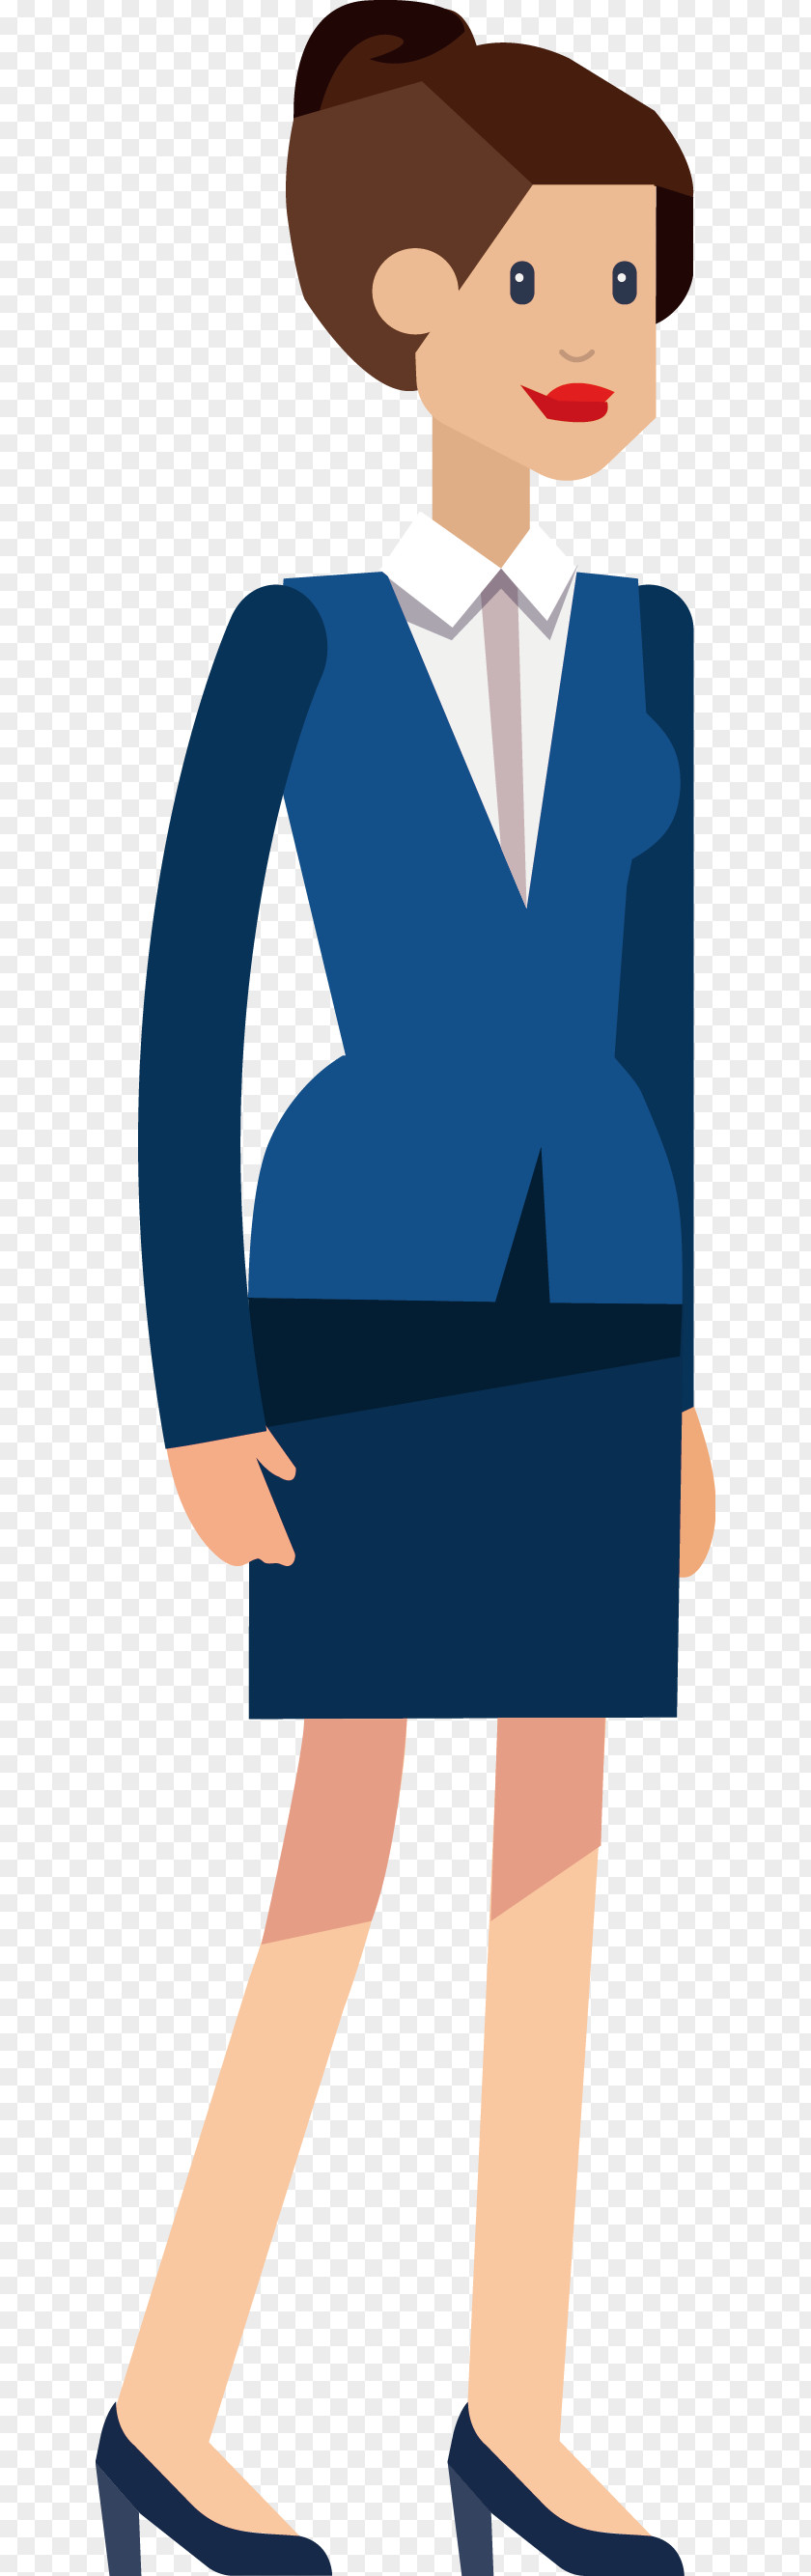 Female Business People Vector Businessperson Digital Marketing Executive Search Human Resources PNG